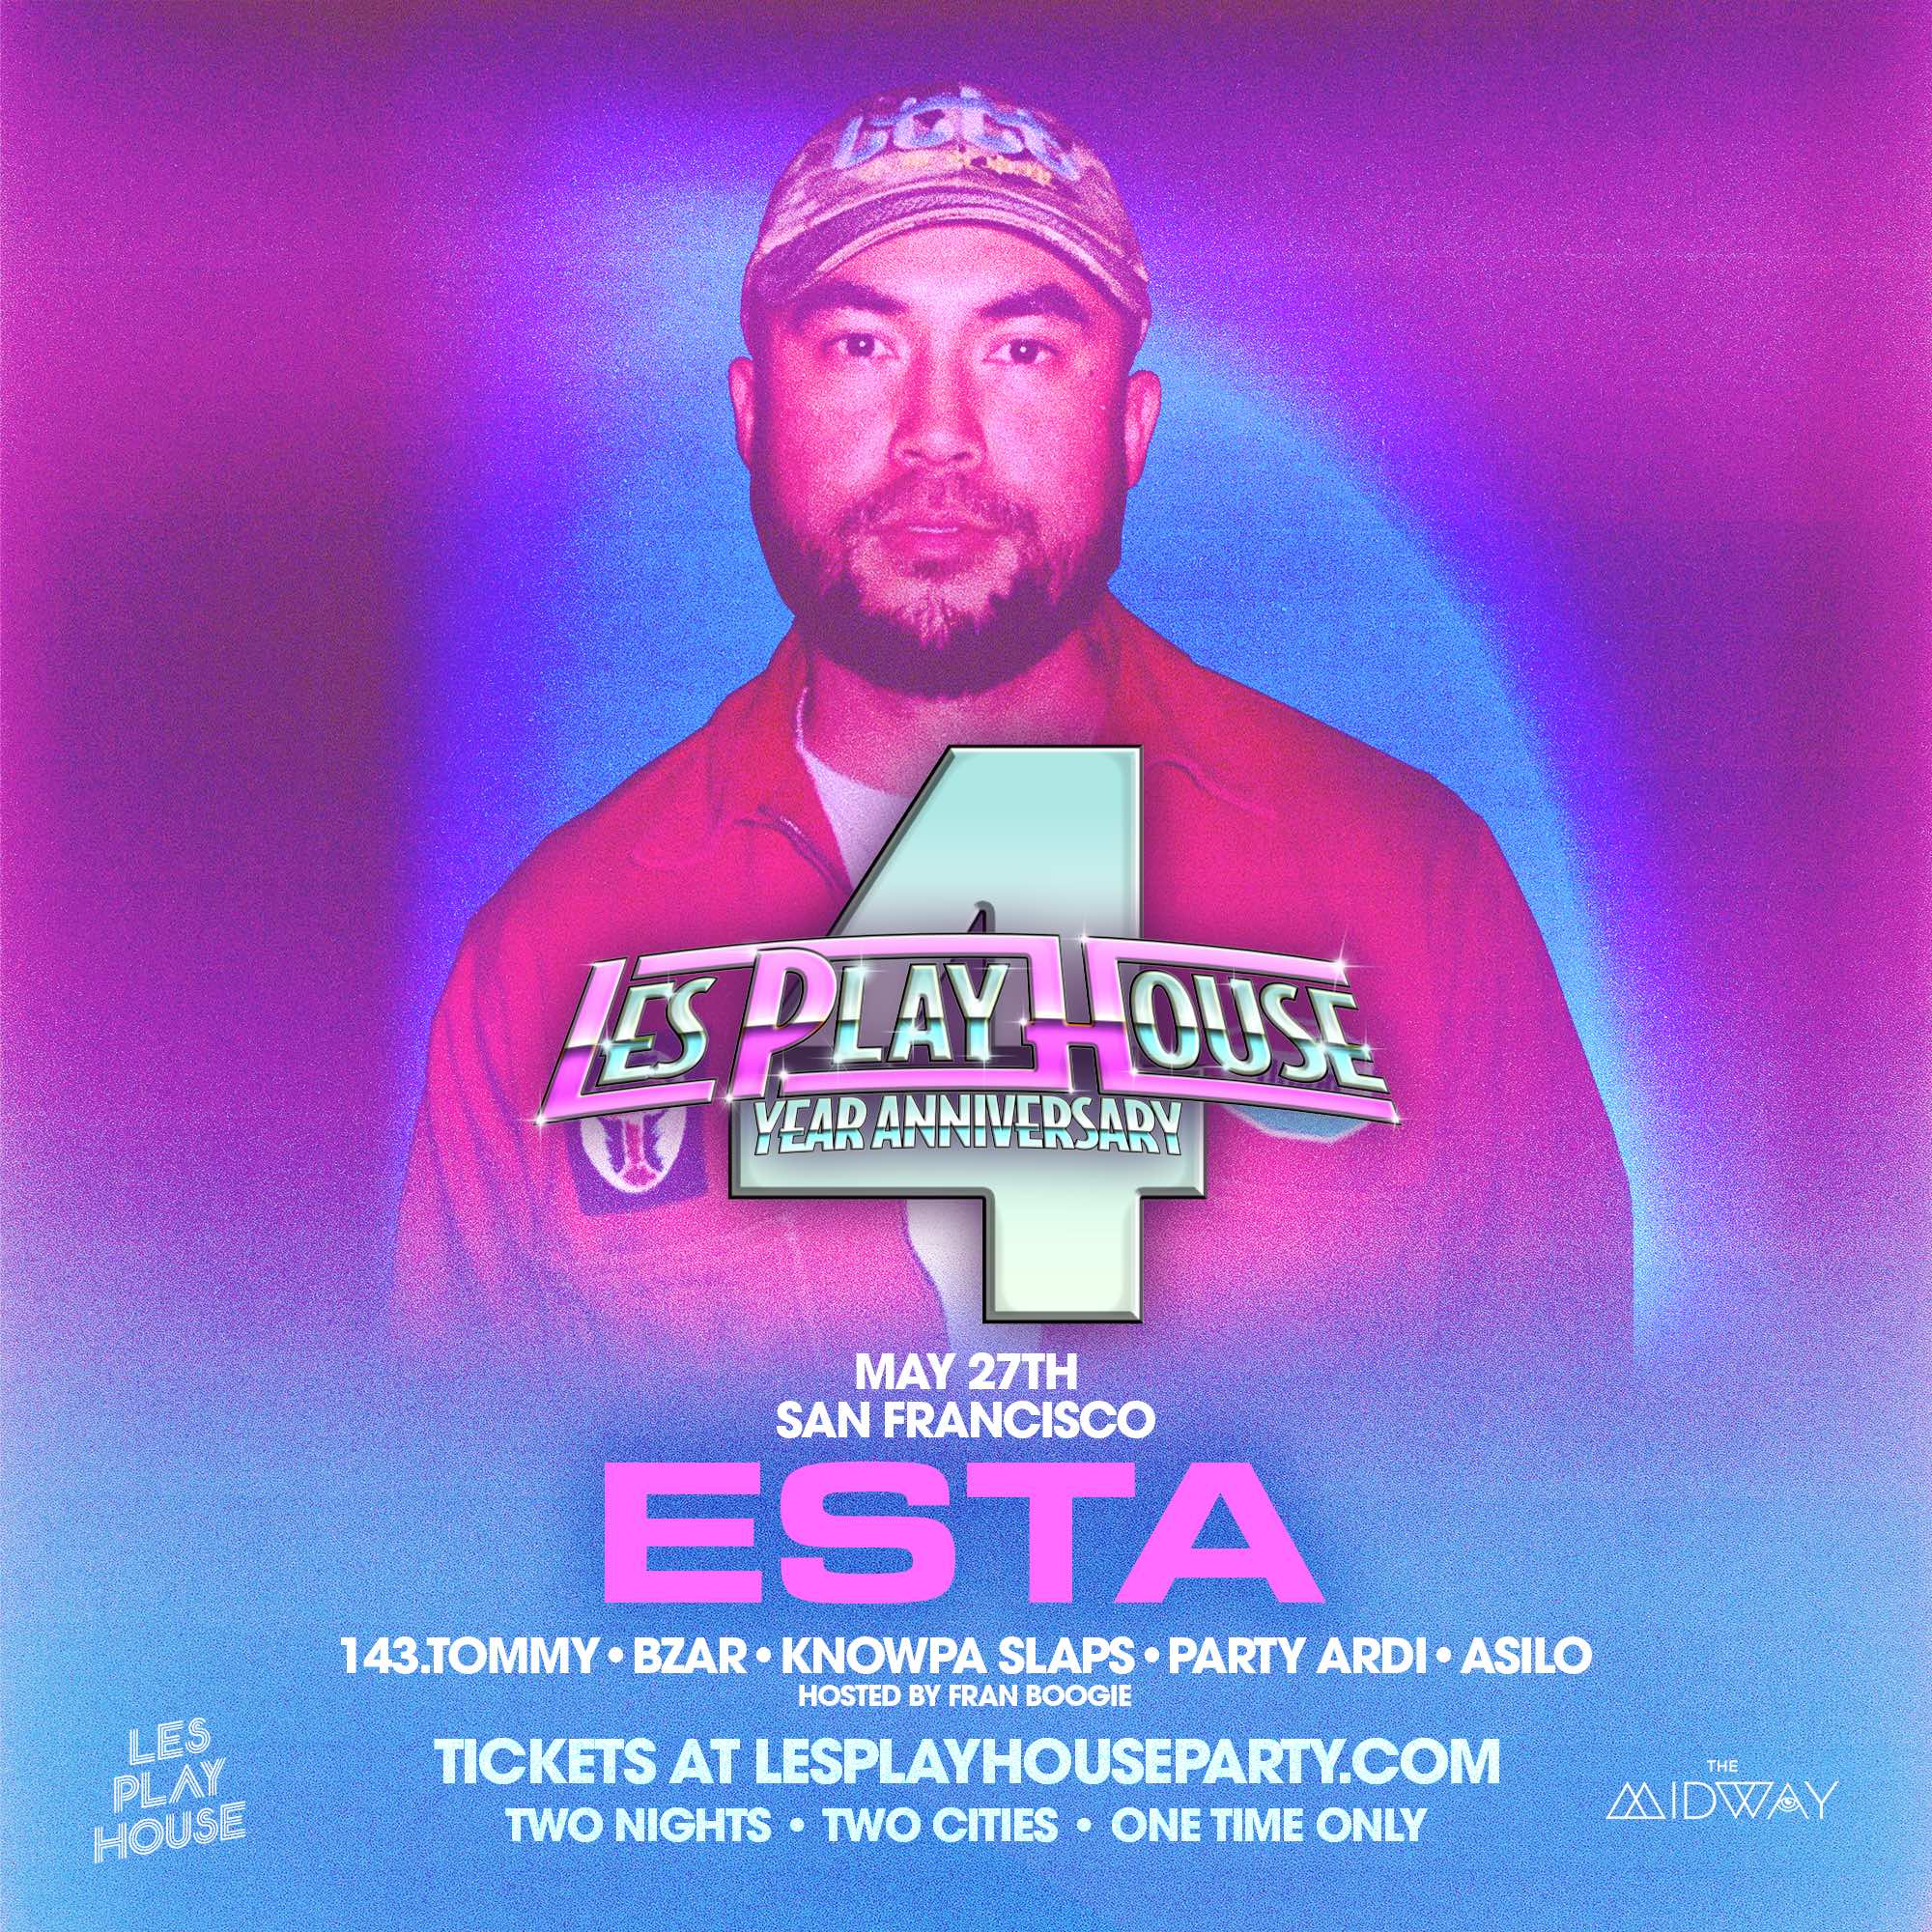 Les Play House 4 Year Anniversary with ESTA Tickets at The Midway in San  Francisco by The Midway SF | Tixr